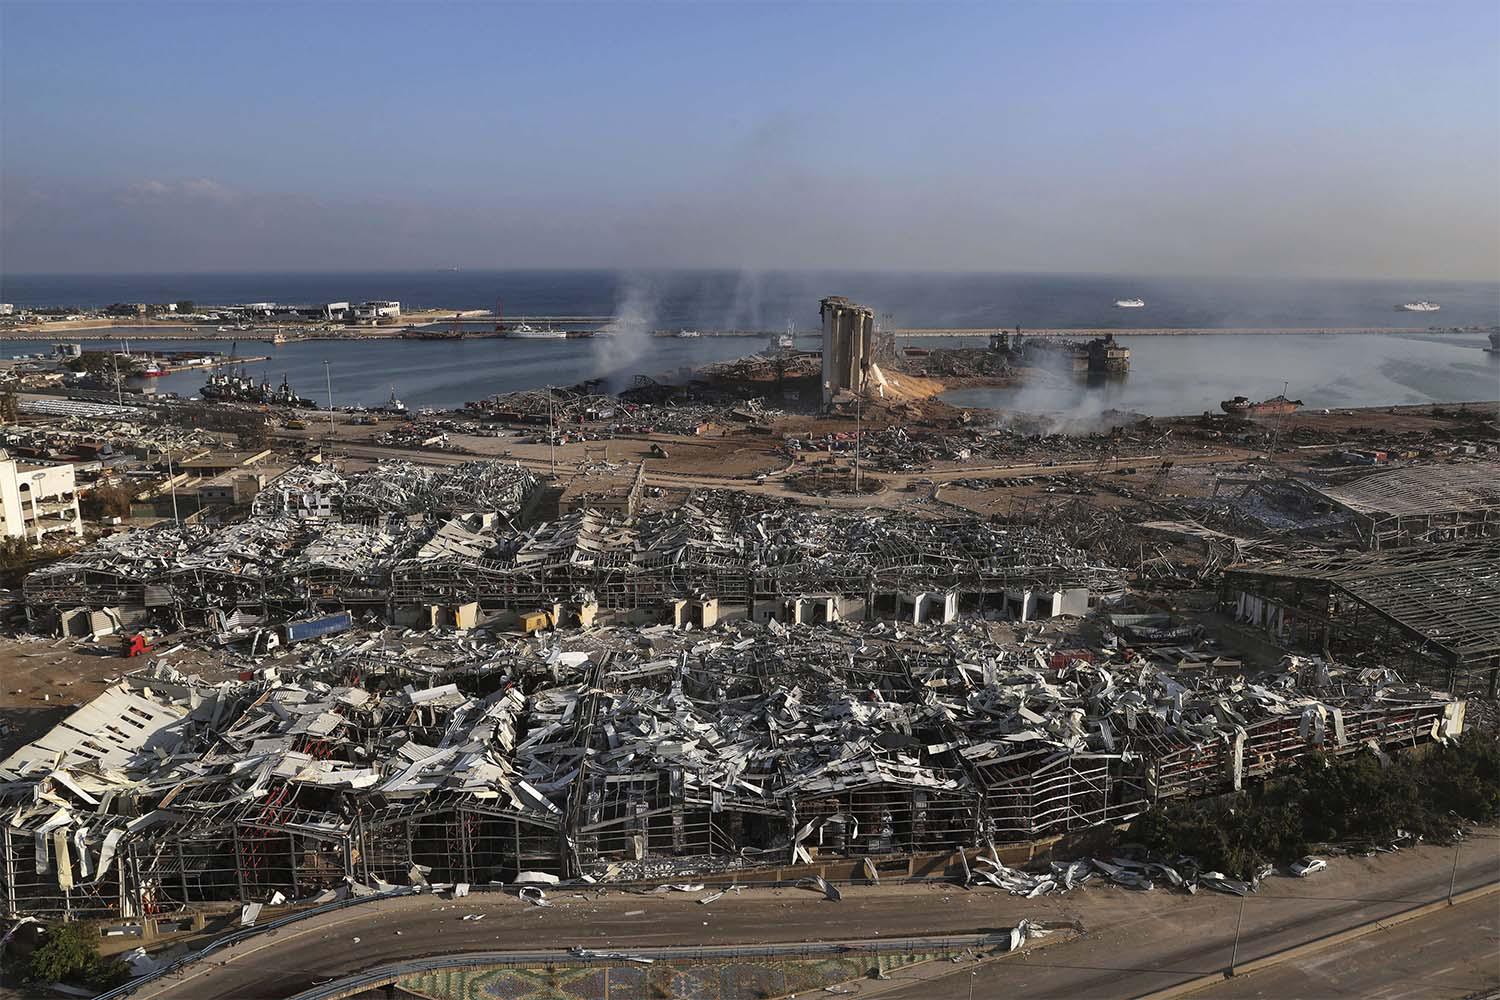 Nearly 3,000 tons of ammonium nitrate had been improperly stored in the Beirut port for years